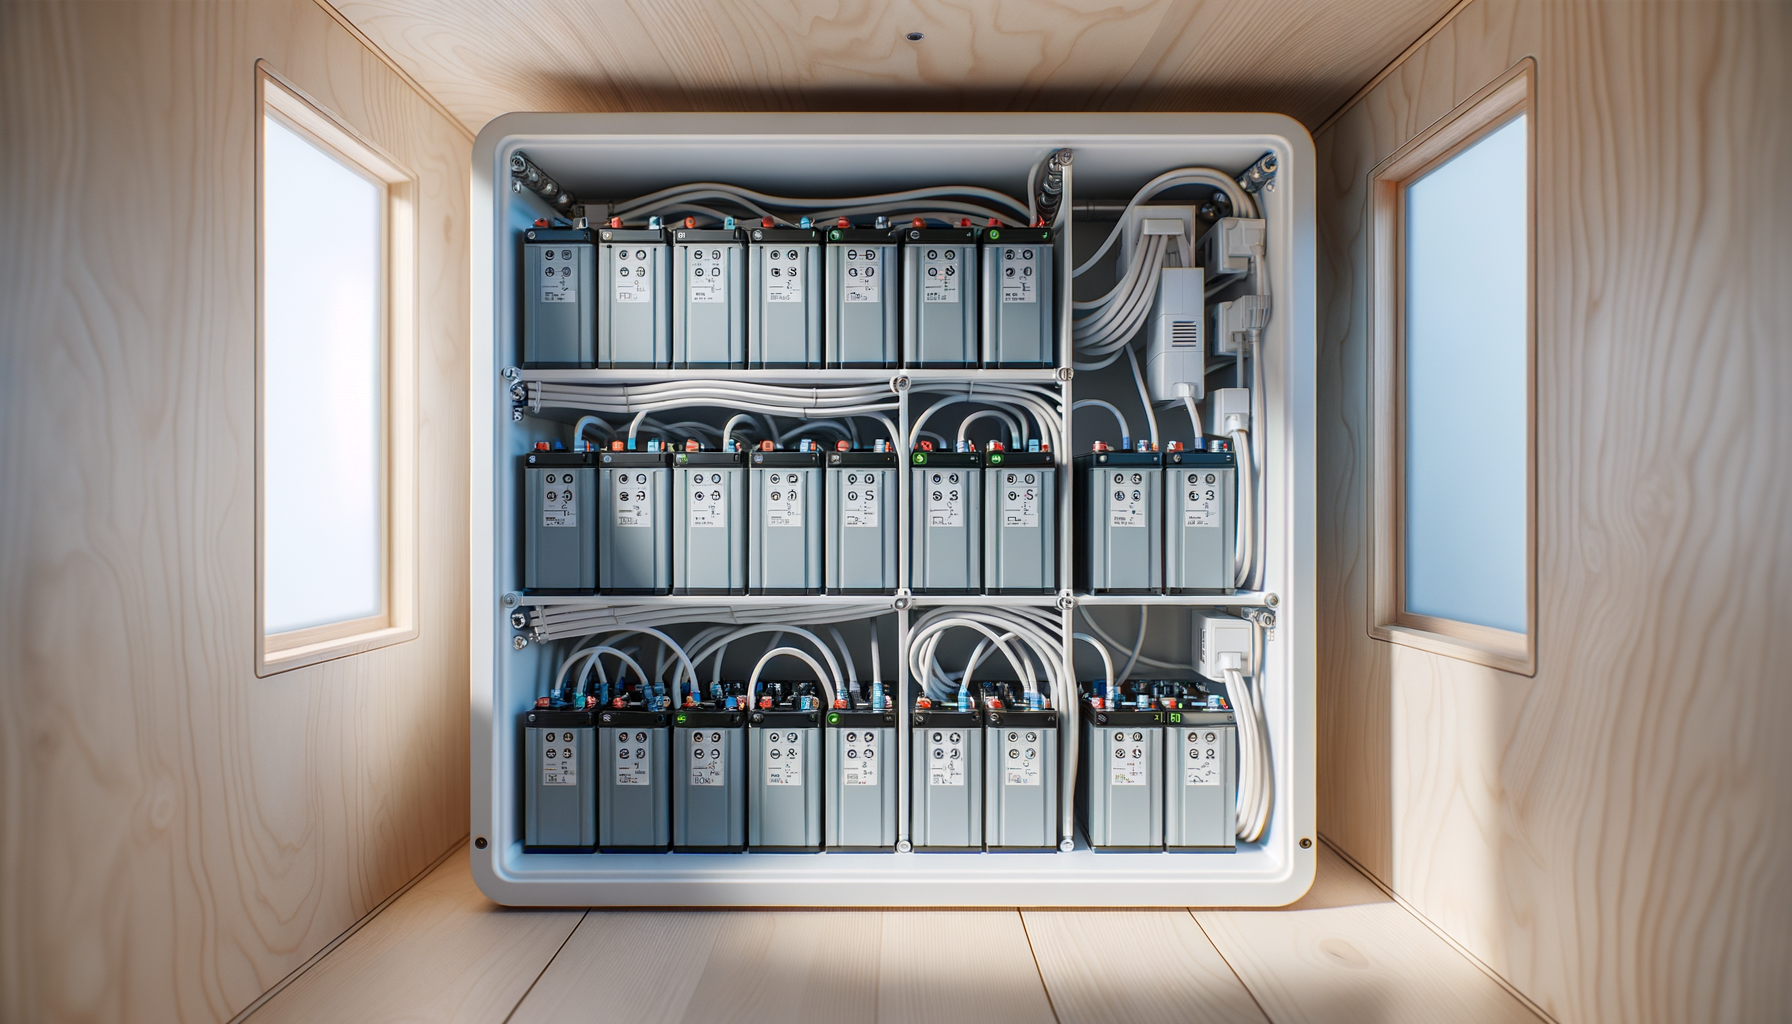 ALT: Organized battery bank system in a tiny home